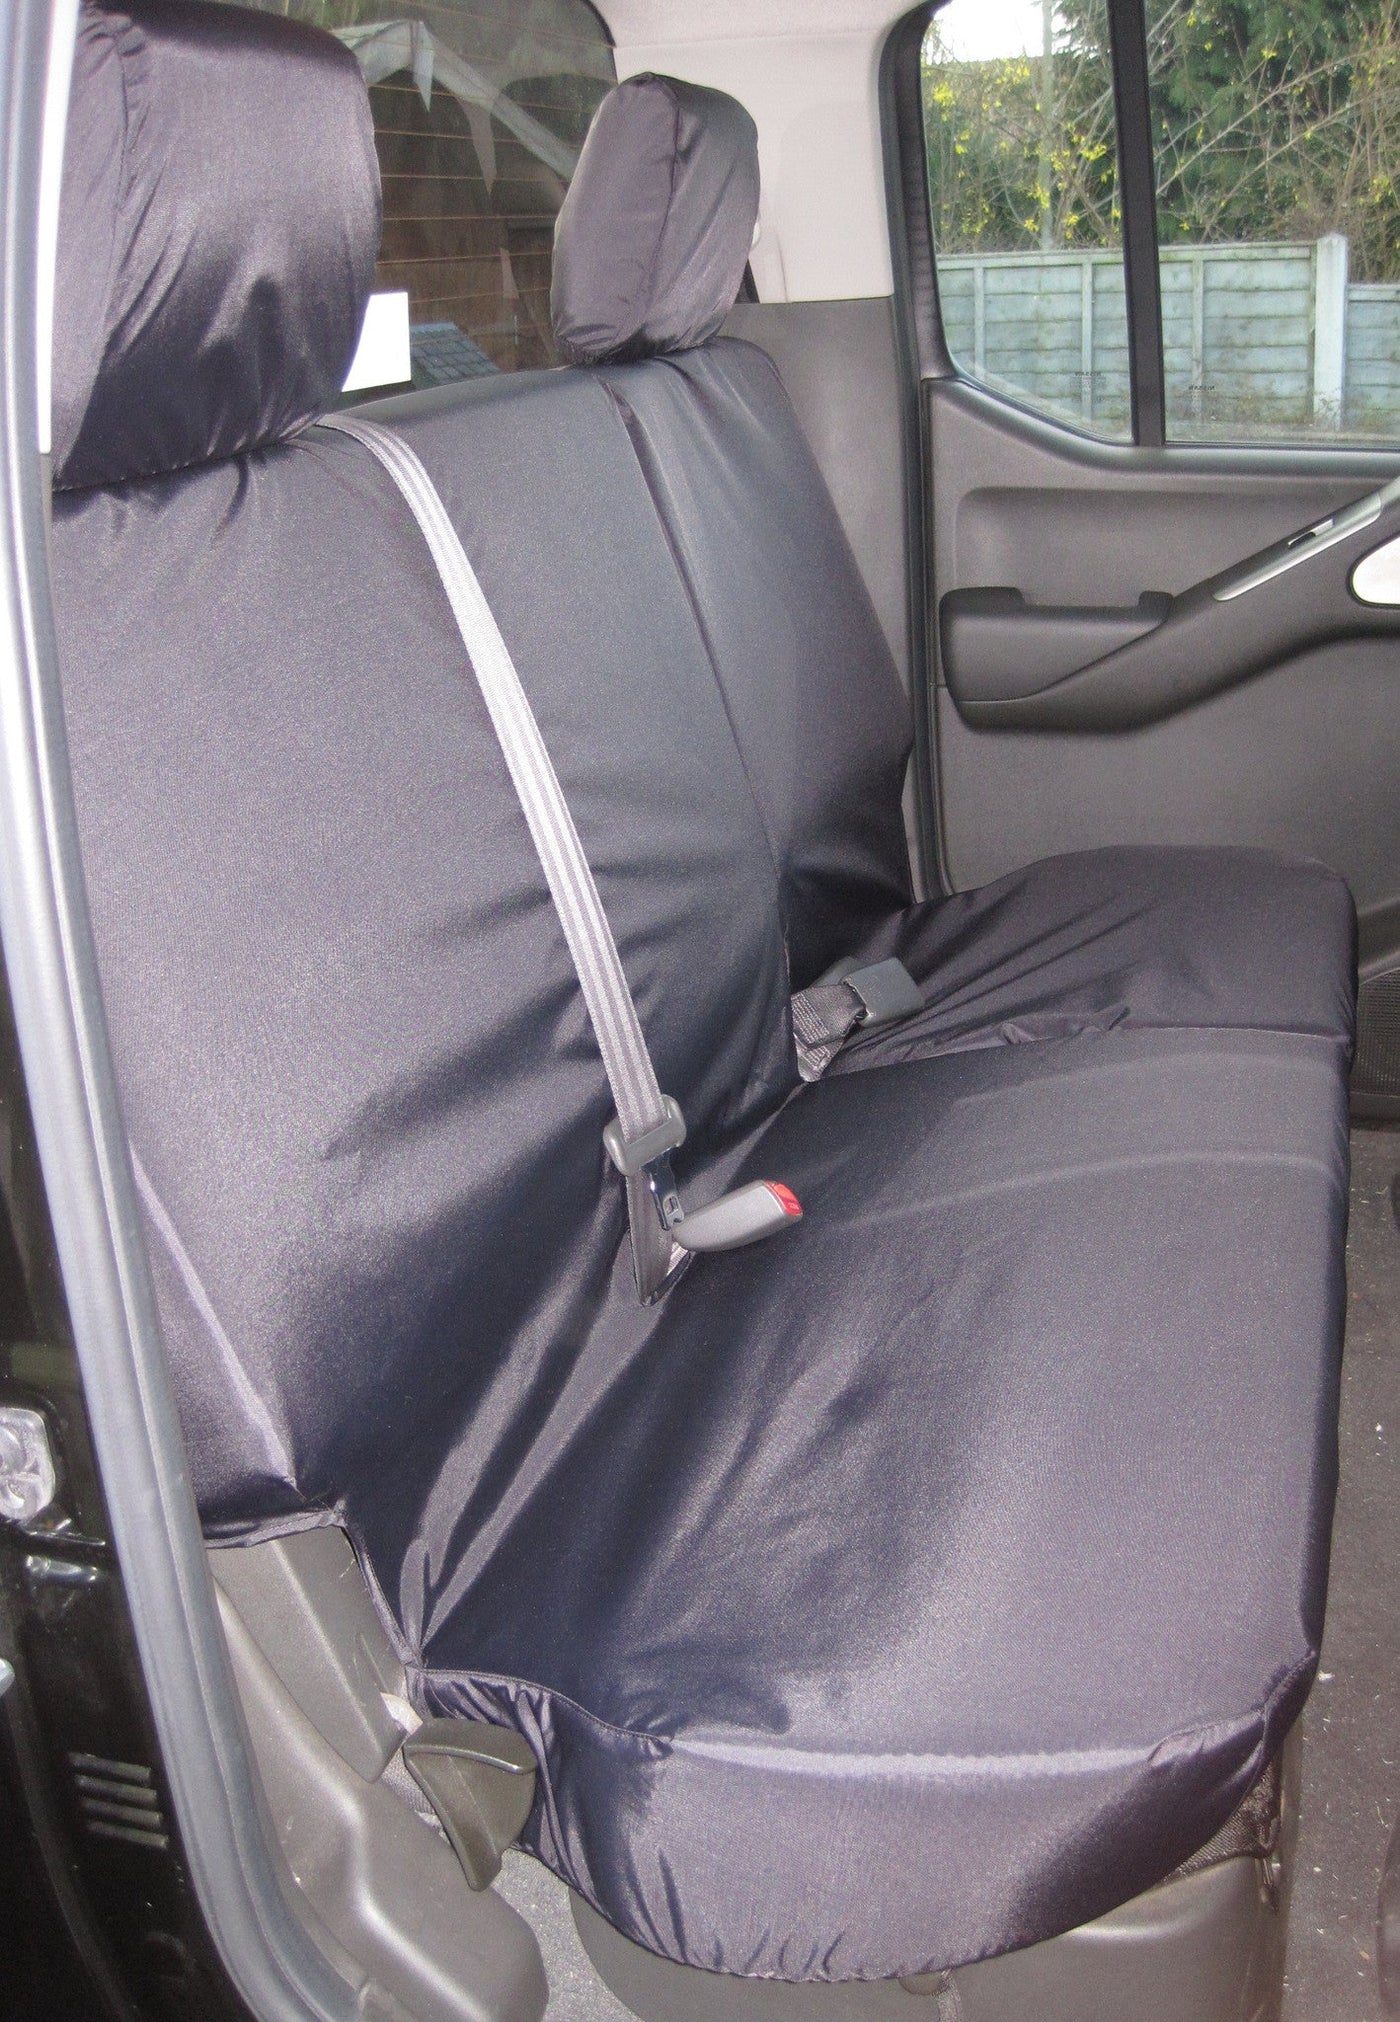 Nissan Navara Double Cab (2005 to 2016) Tailored Seat Covers Rear Seats / Black Scutes Ltd